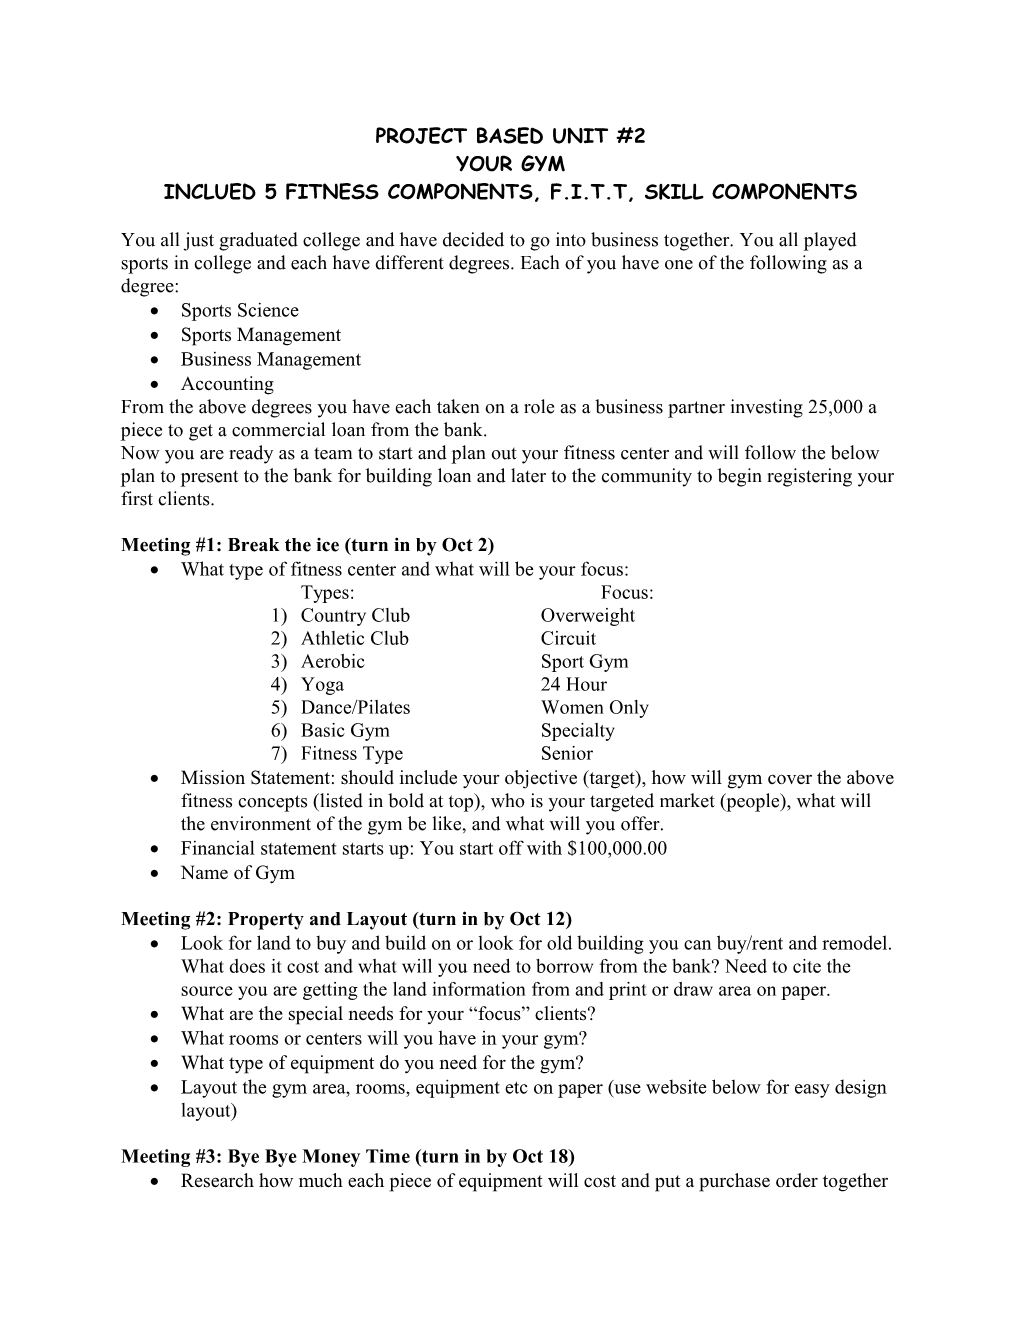 Inclued 5 Fitness Components, F.I.T.T, Skill Components